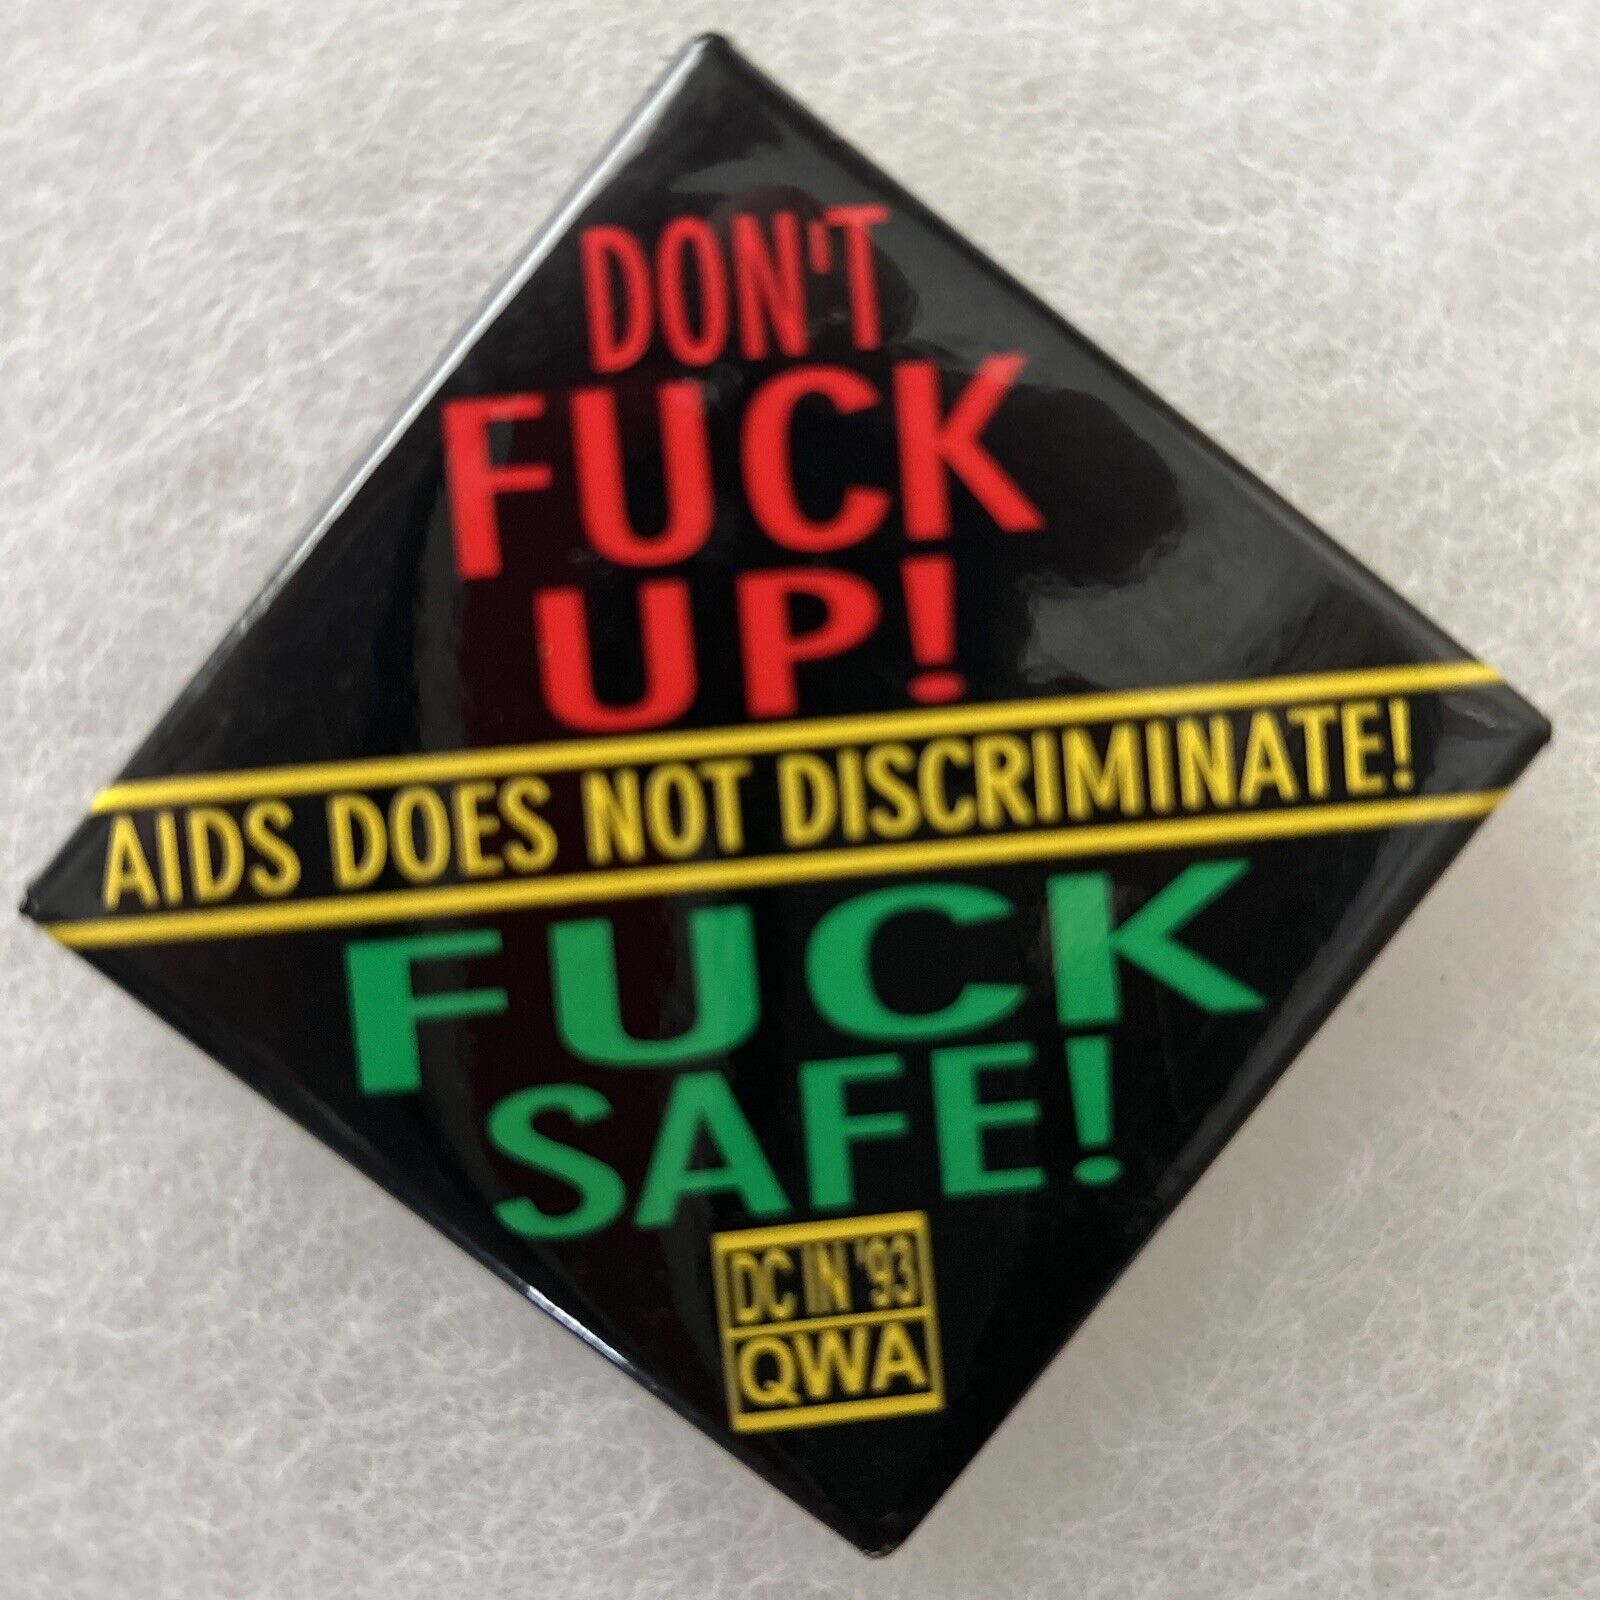 Don’t F Up AIDS Does Not Discriminate F Safe DC In 93 QWA 2” x 2” LGBTQ pinback